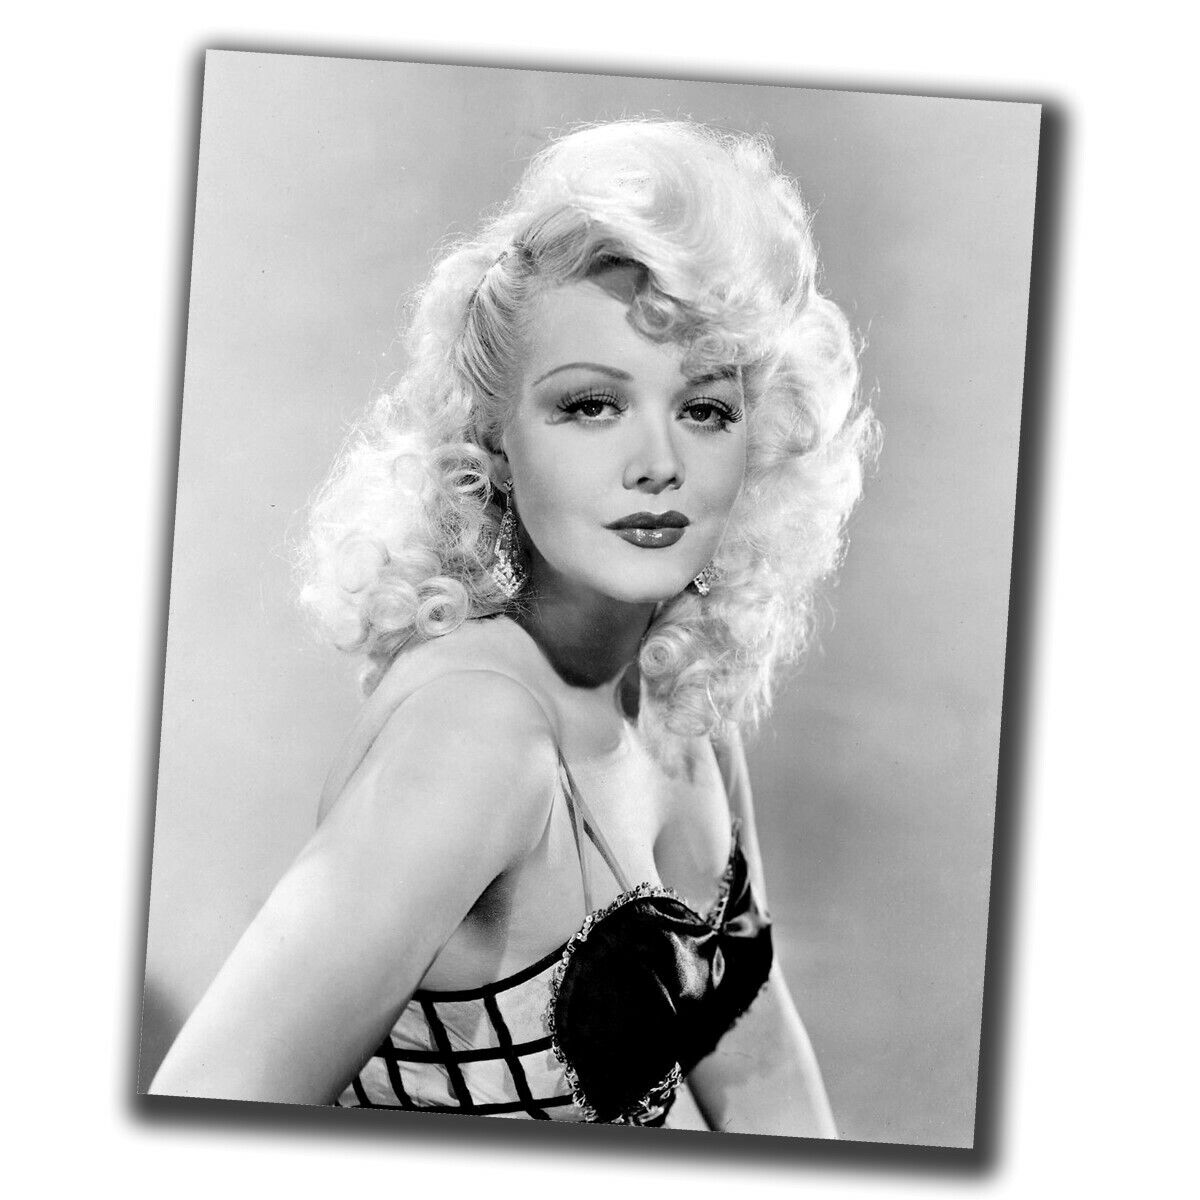 Marion Martin FINE ART Celebrities Vintage Photo Glossy Big Size 8X10in H066